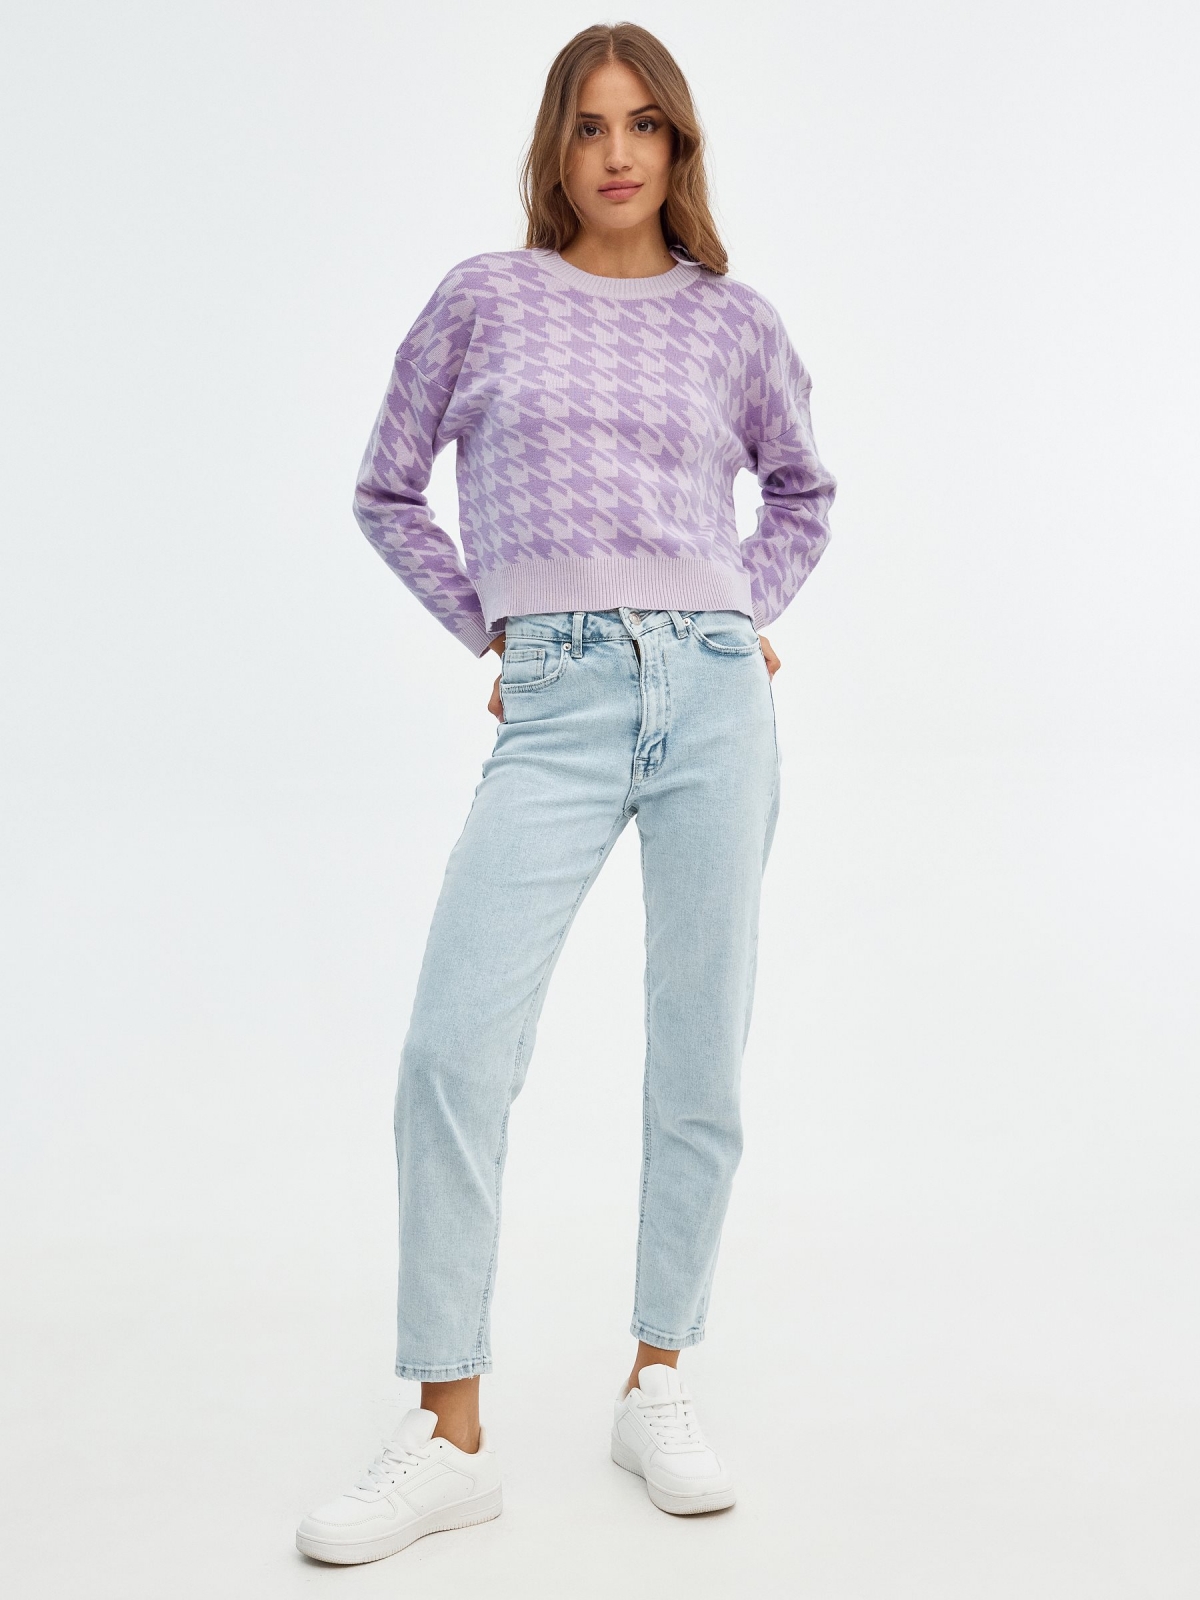 Houndstooth jacquard jumper mauve front view